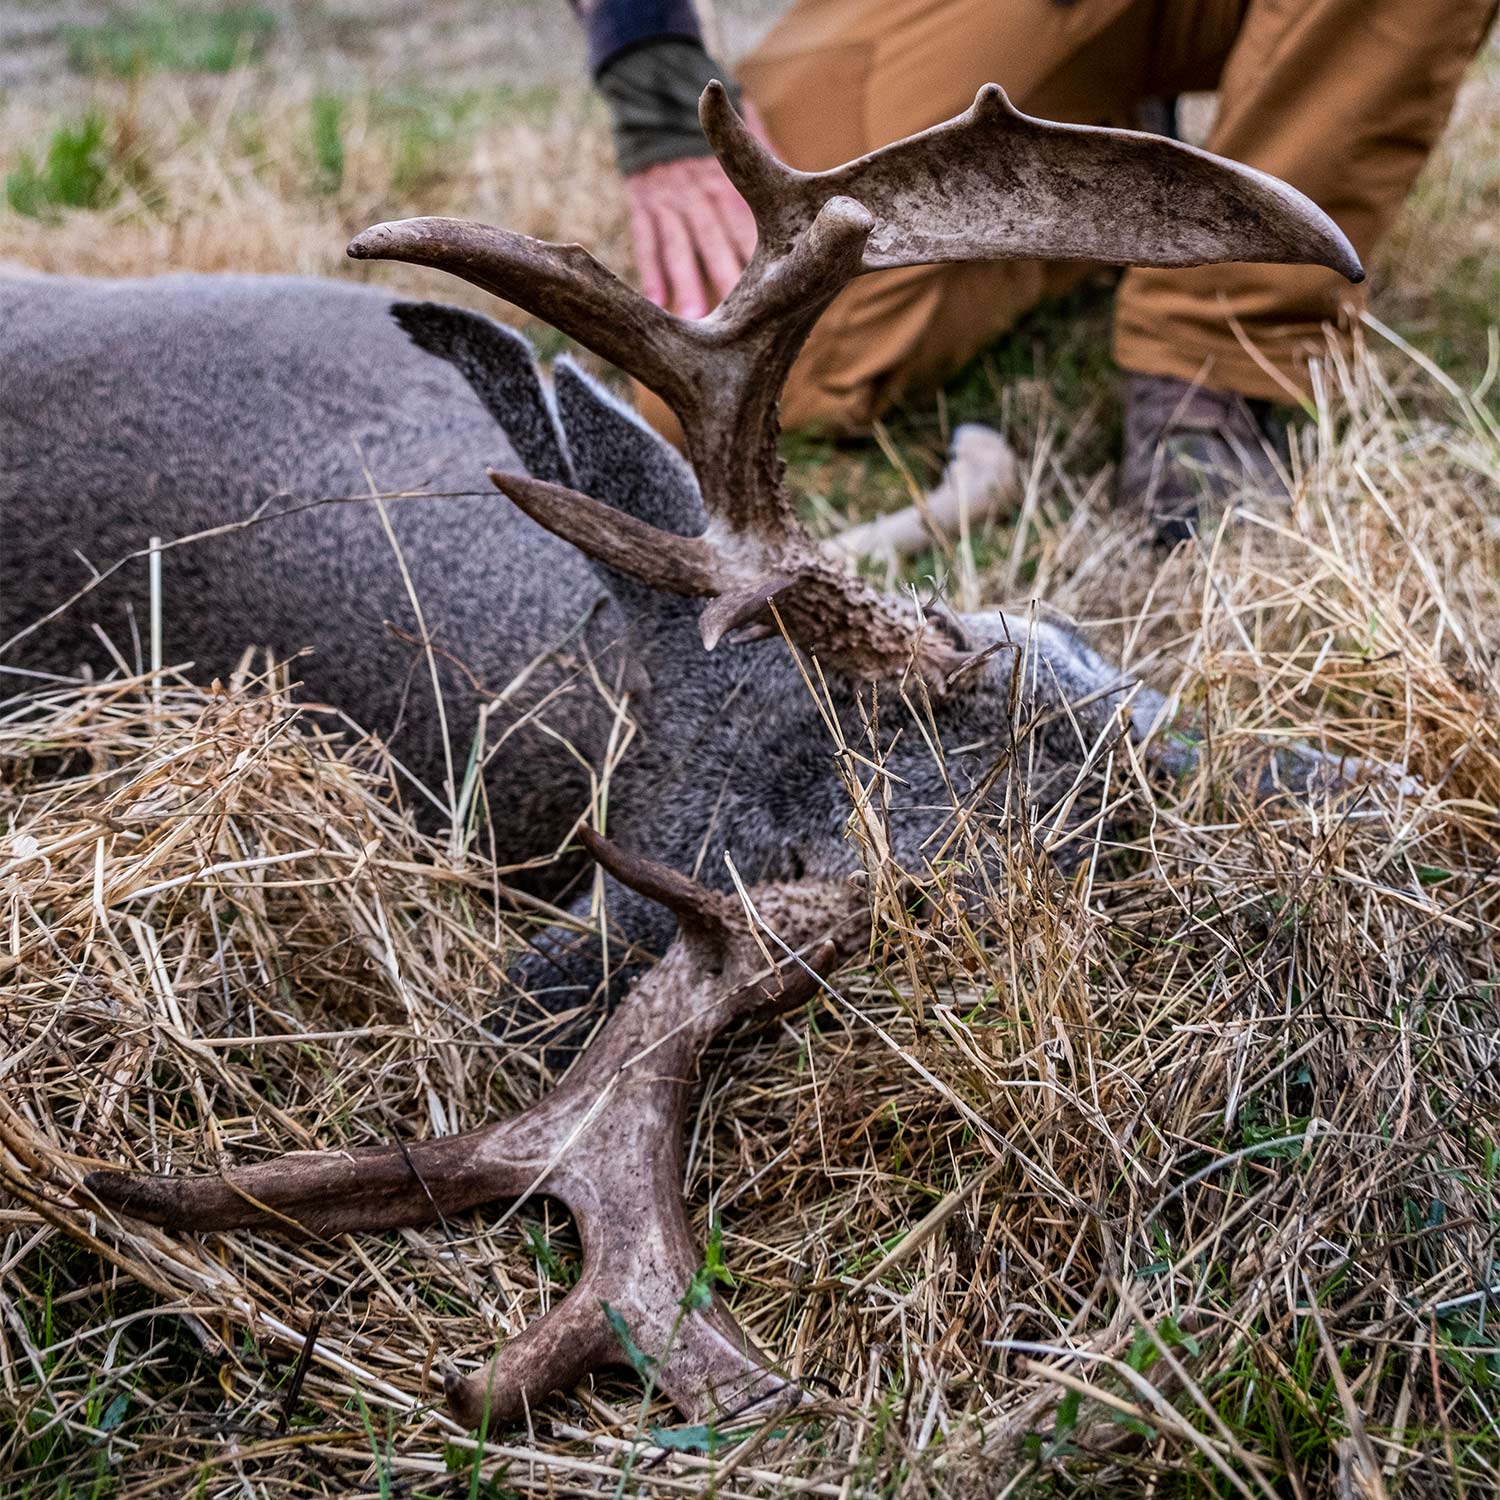 A hunter kneels and inspects the antlers of a whitetailed buck.